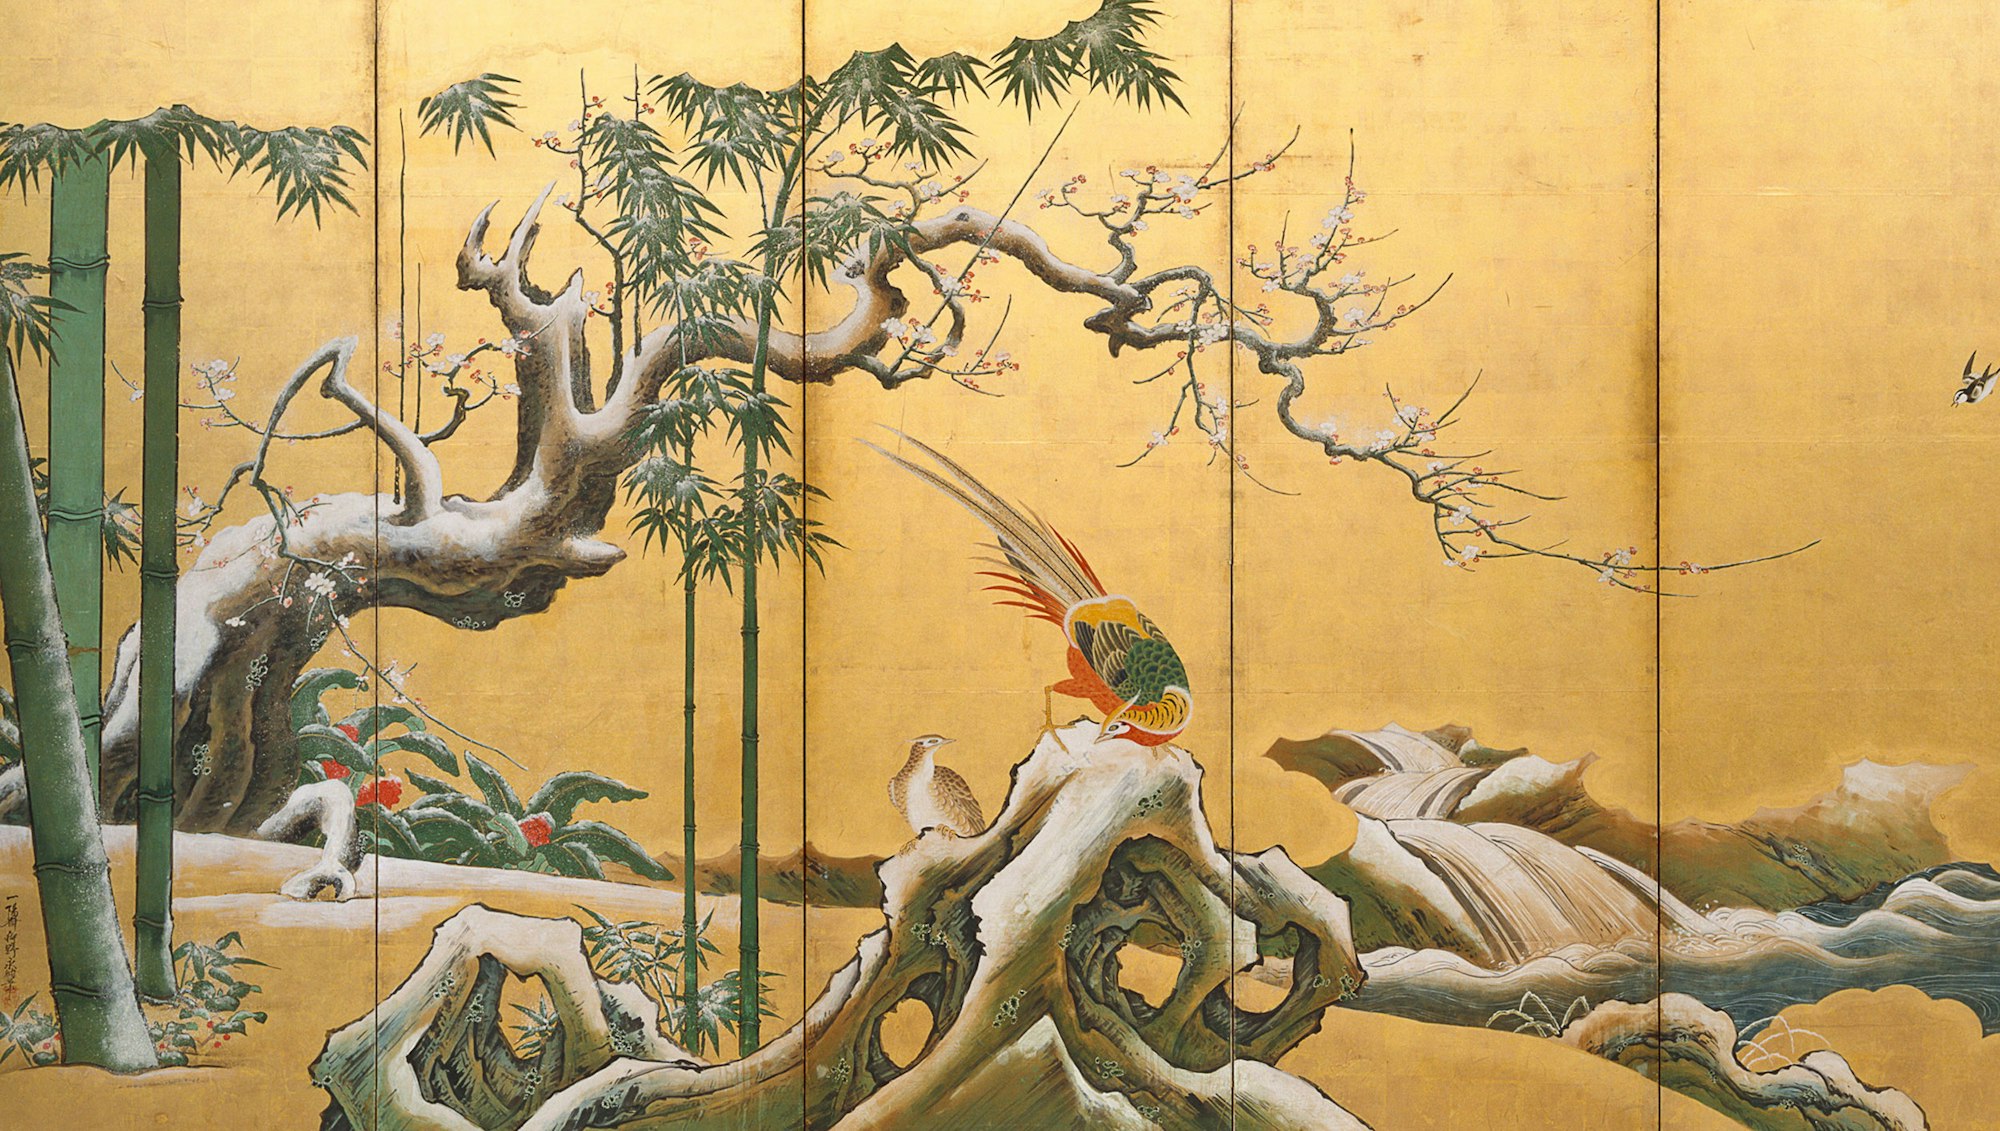 Kanō Einō Pine, bamboo and plum blossom 17th century, Art Gallery of New South Wales